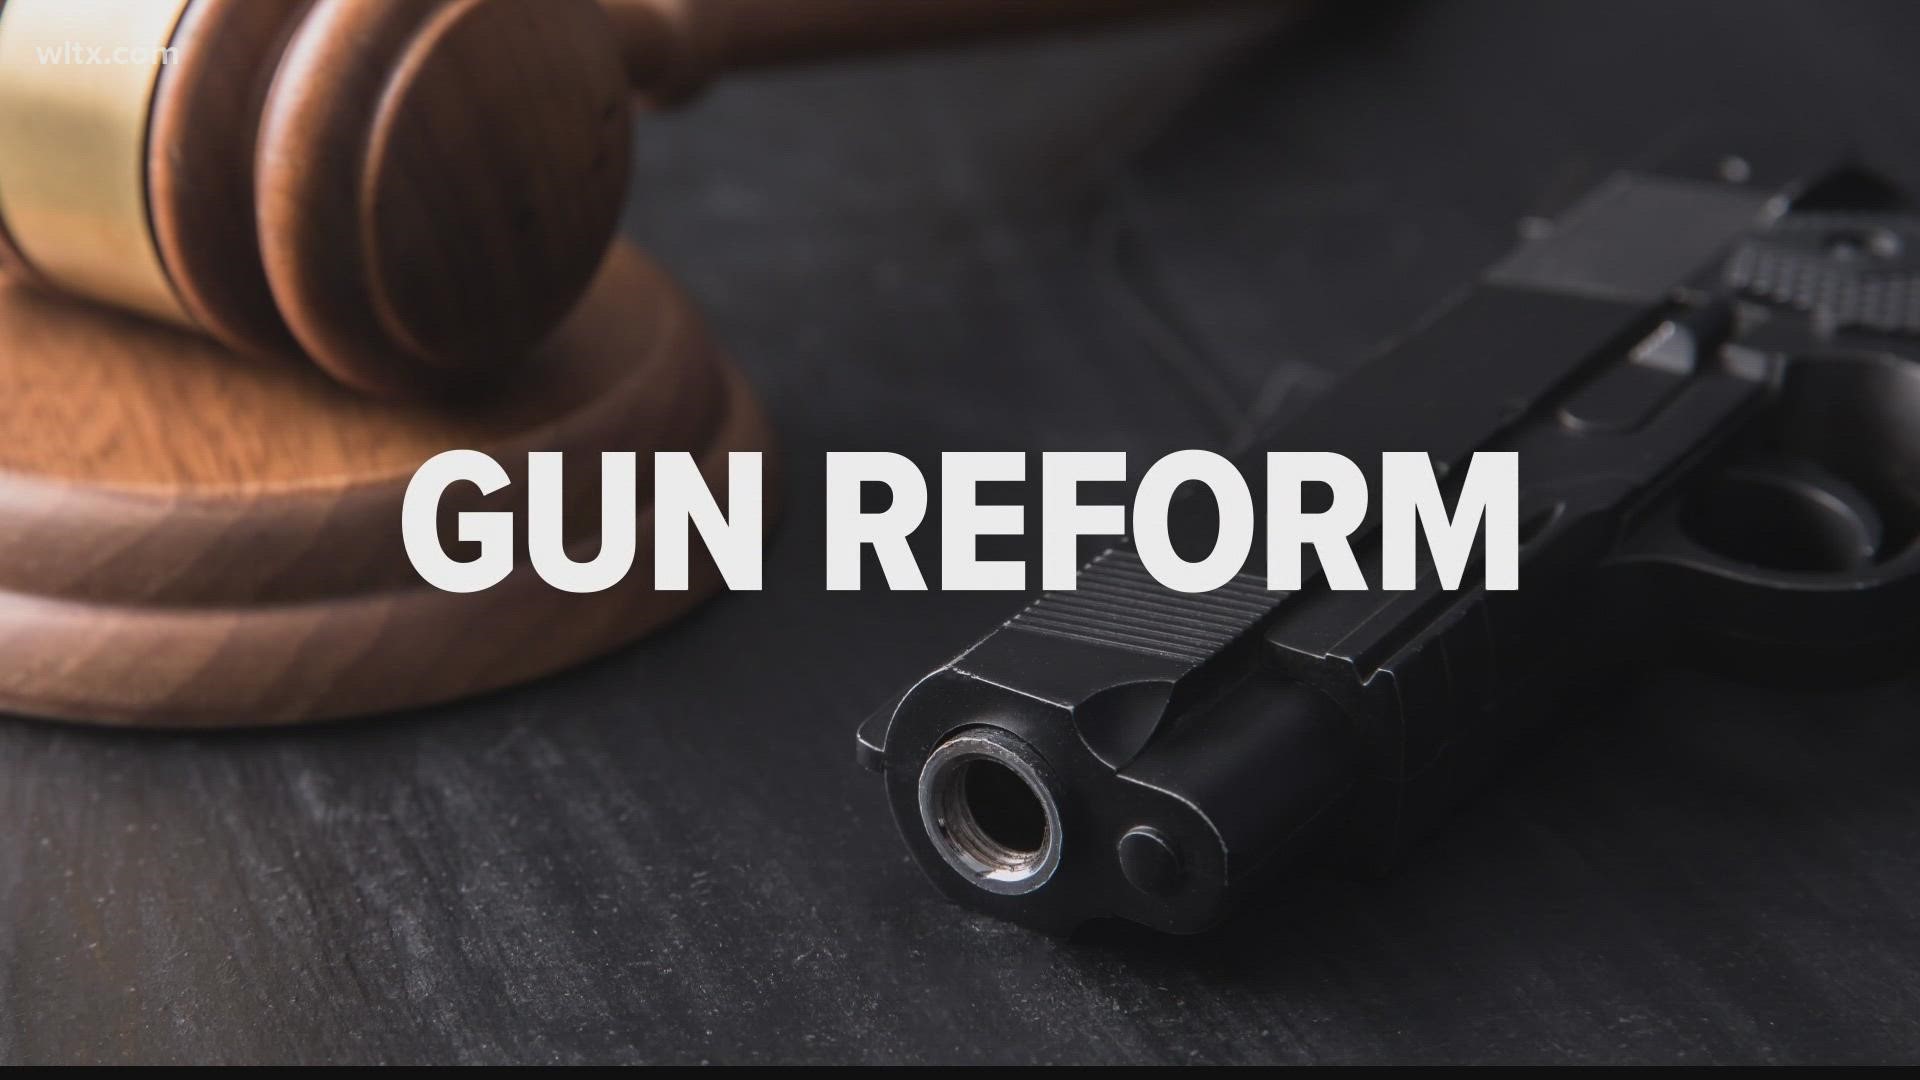 The legislation would enhance background checks for gun purchasers younger than 21, among other restrictions.